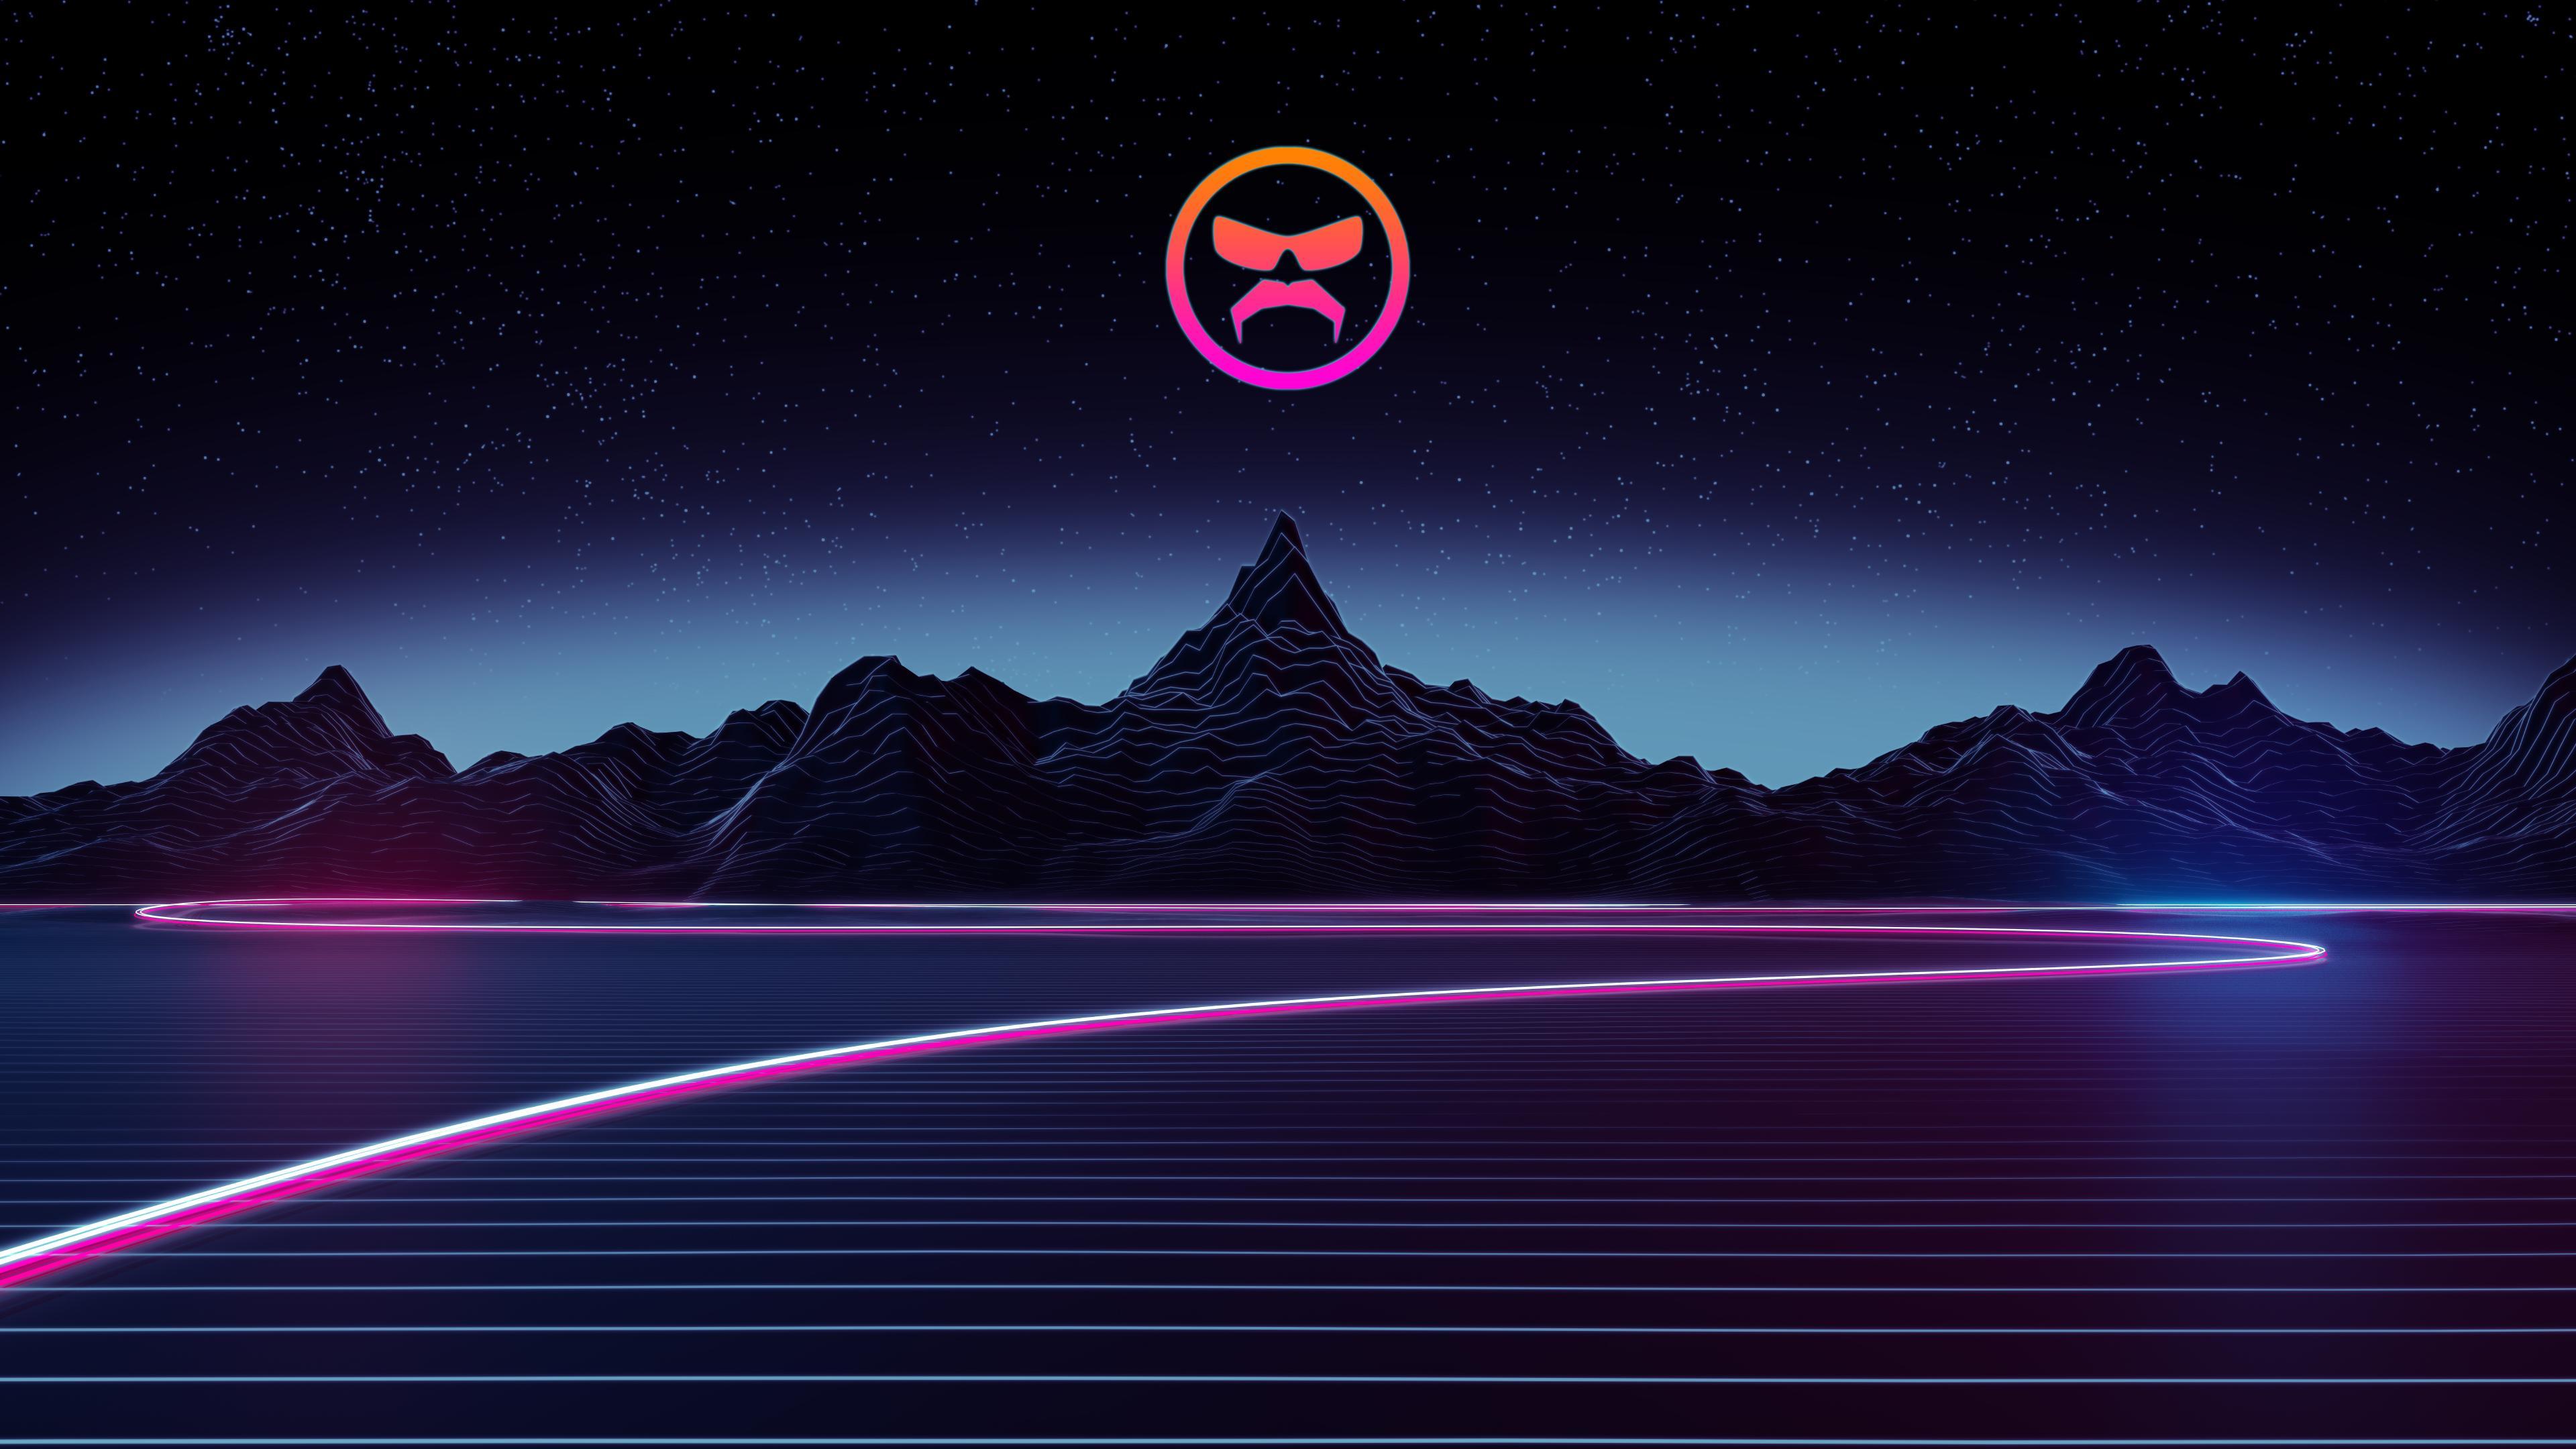 I made some Outrun style wallpaper with Doc's logo!